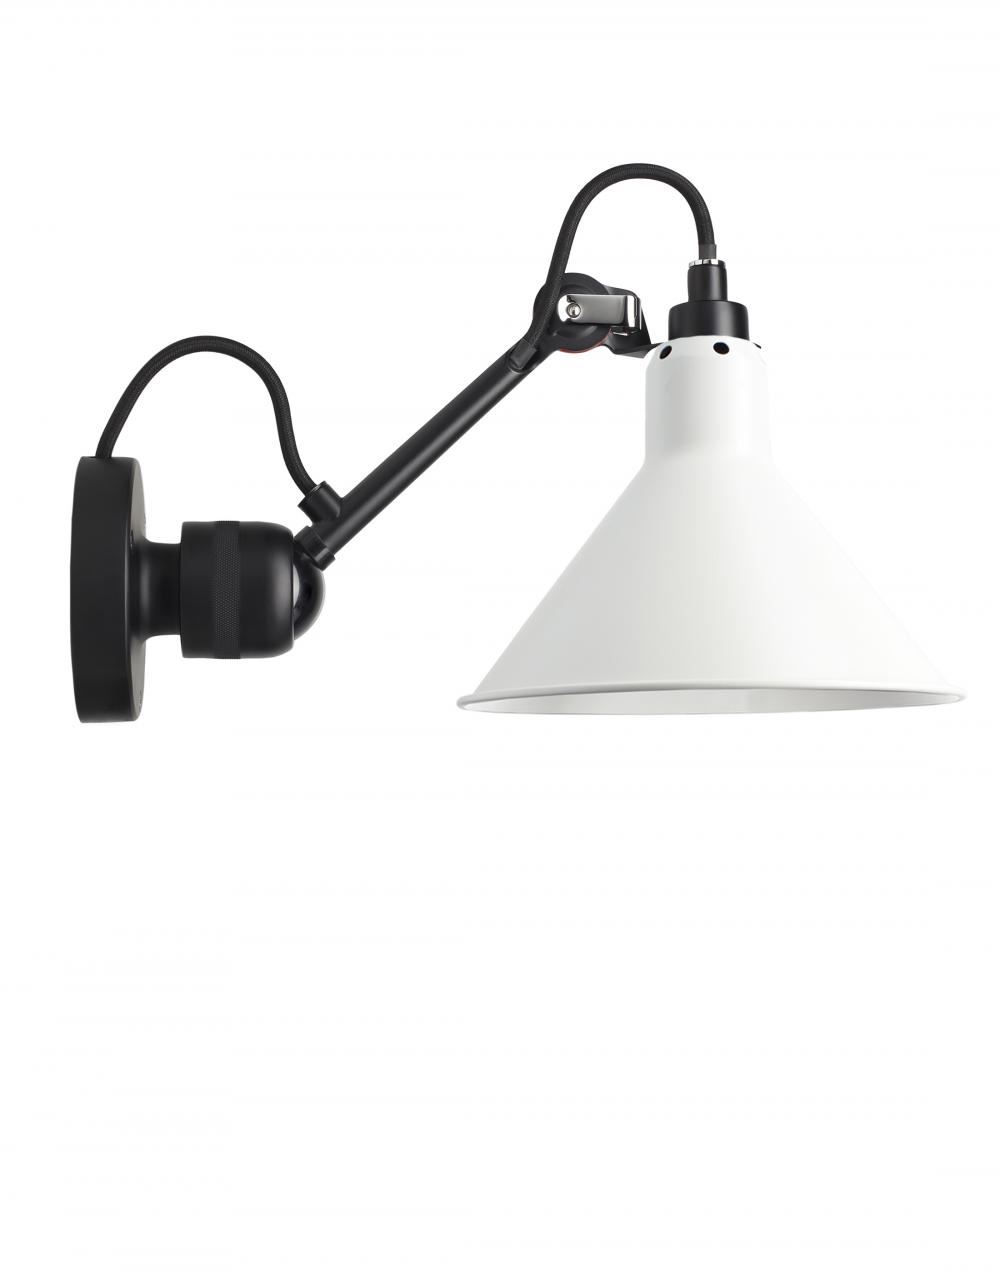 Lampe Gras 304 Small Wall Light Black Arm White Shade Conic Hardwired